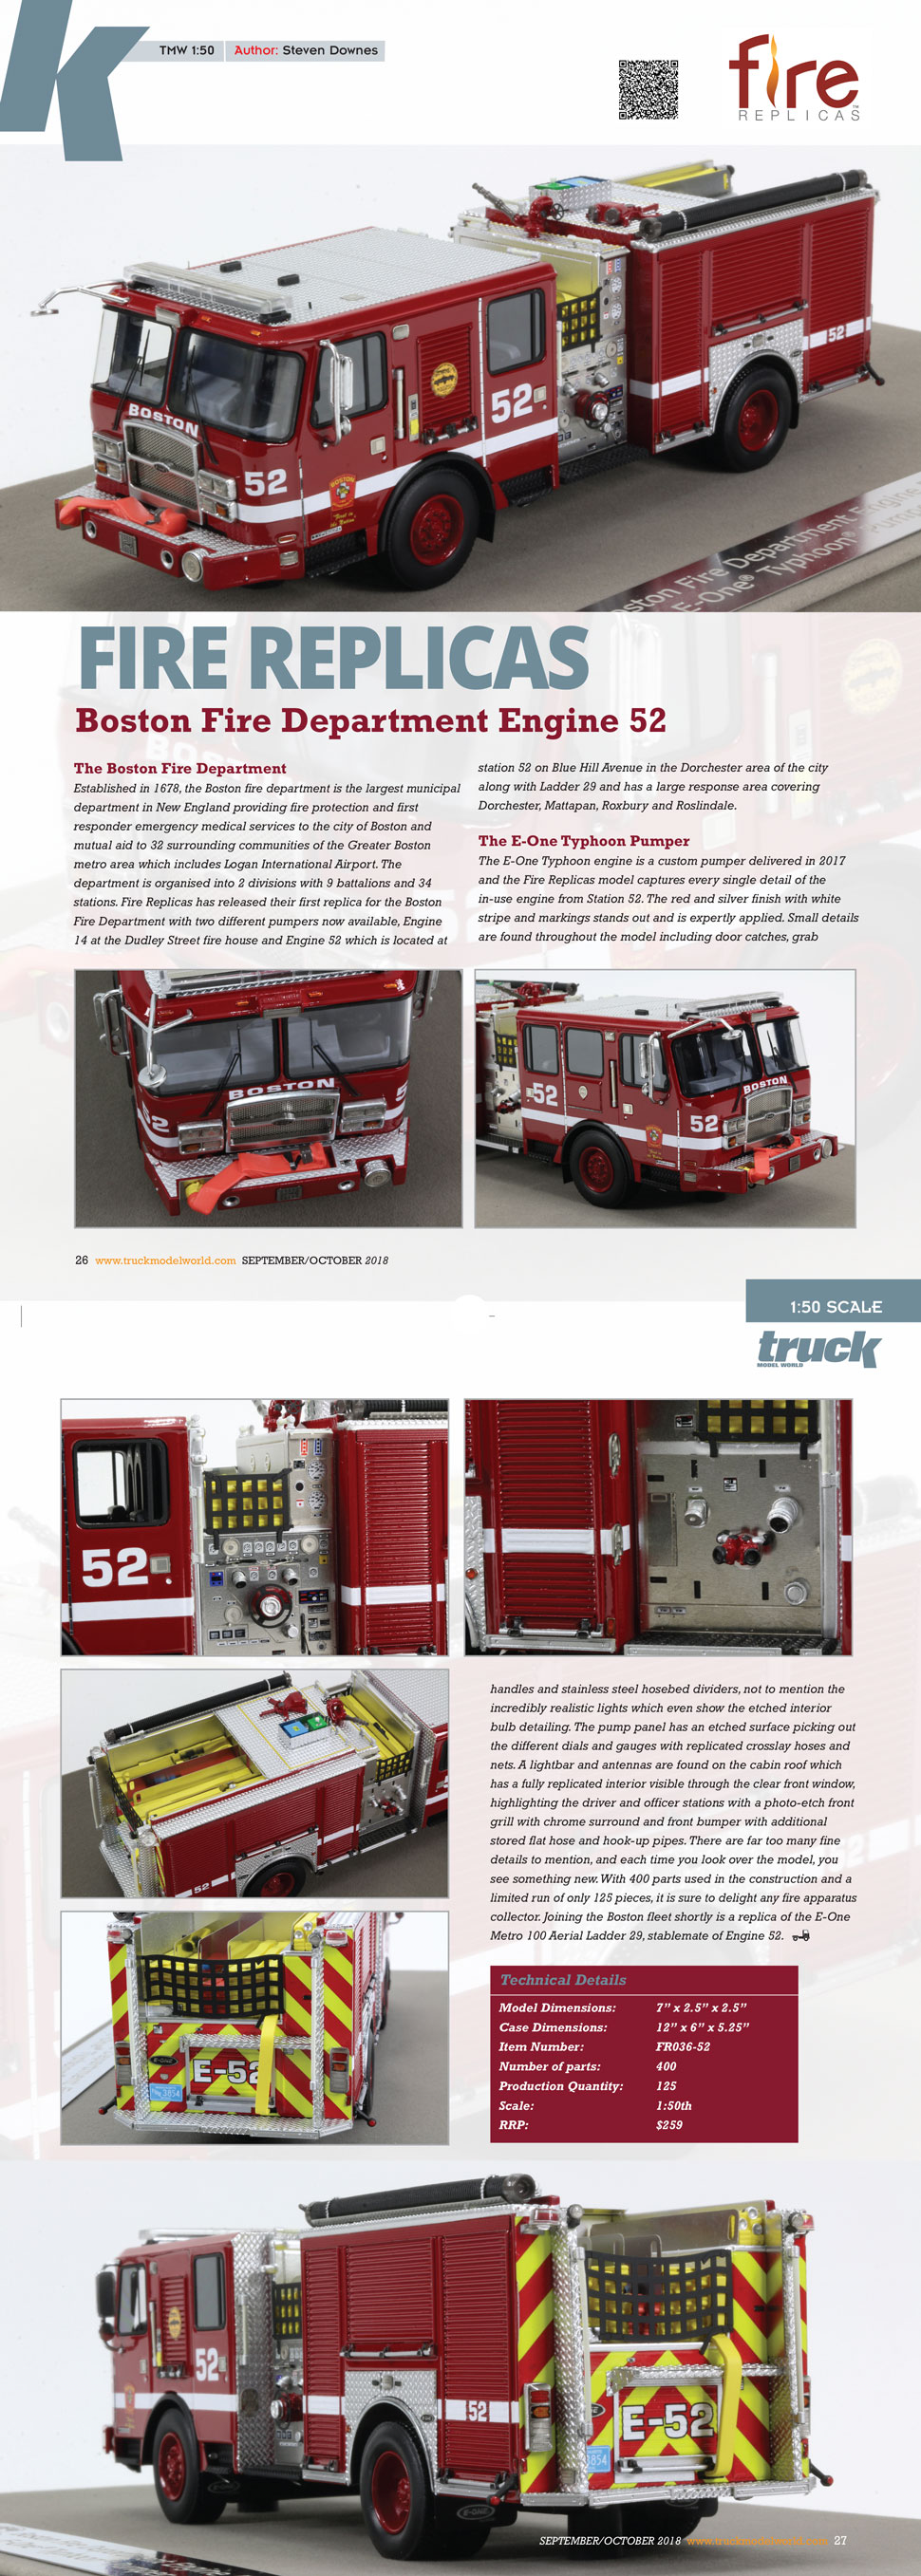 Learn more about Boston Engine 52